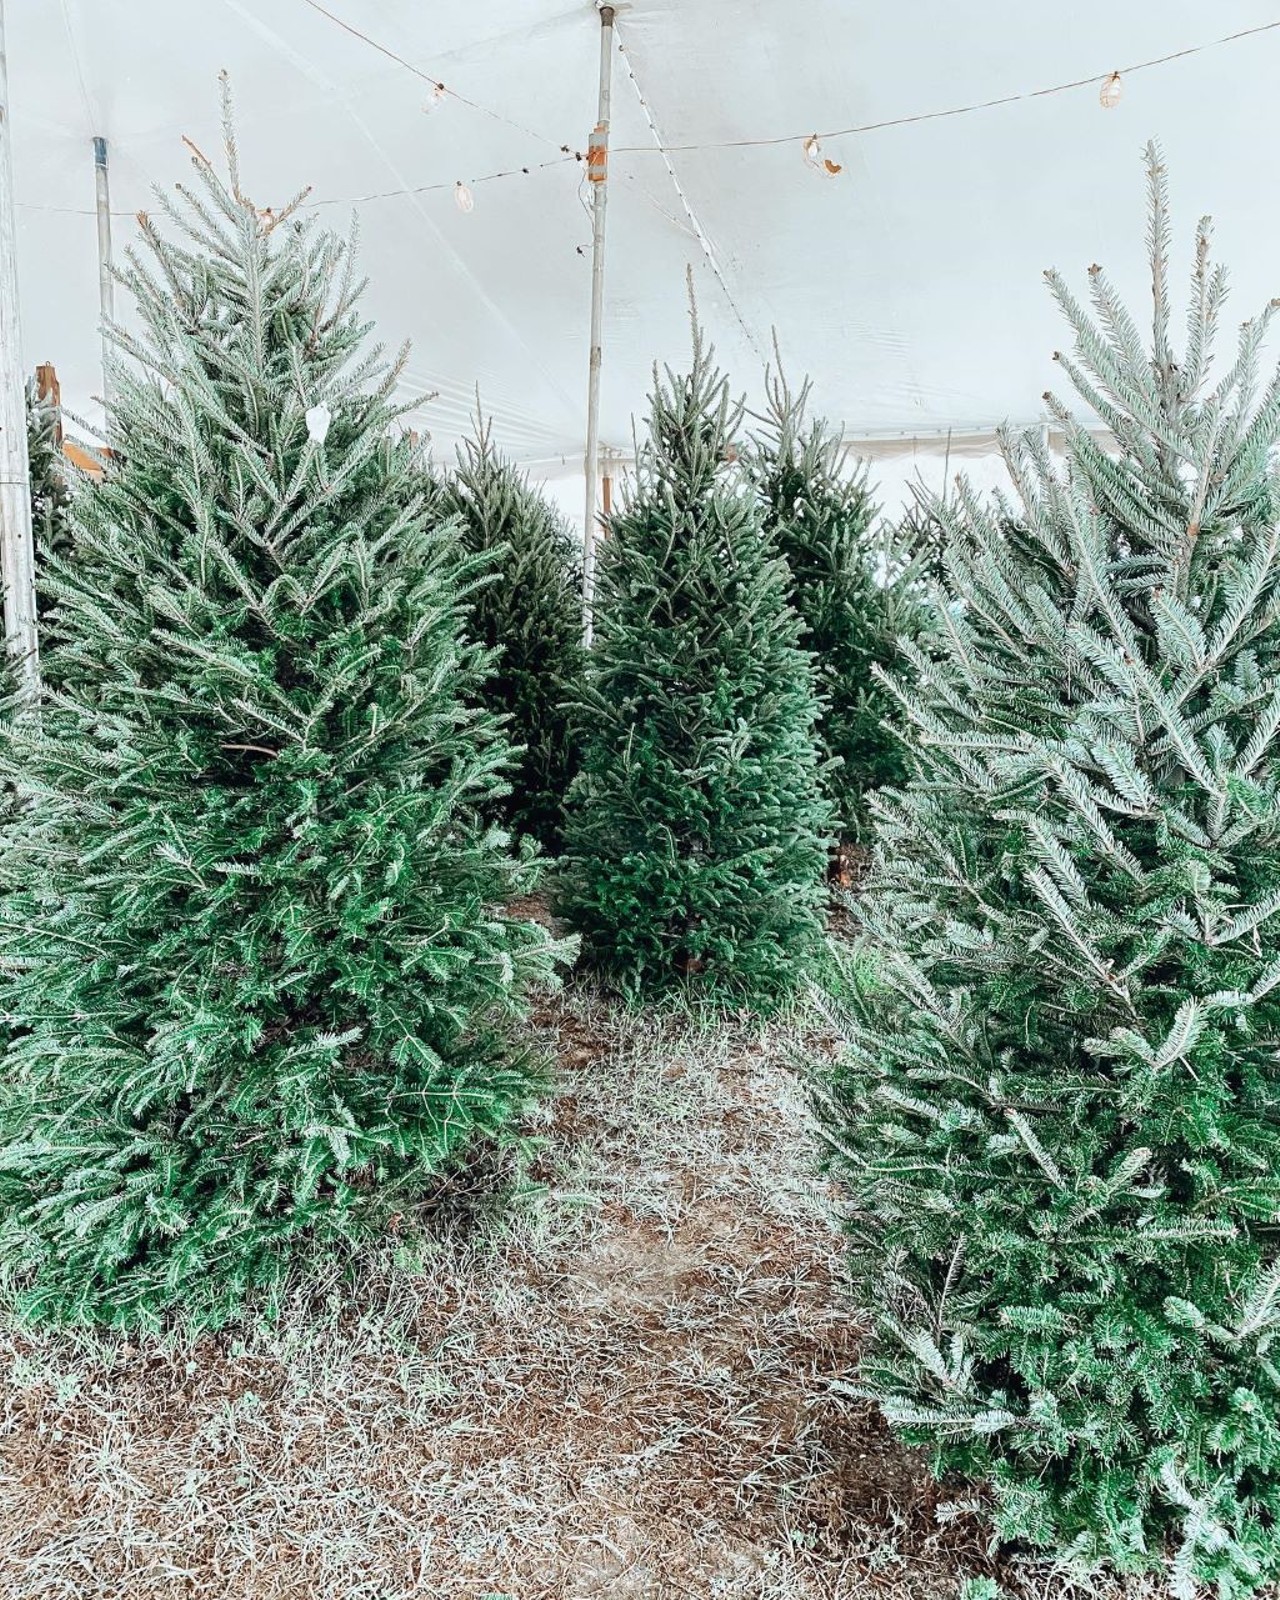 Ciro and Sons Christmas Trees
Three locations across Central Florida including Orlando, Winter Garden and Lake Nona
Dates open: Hours differ across locations; Dr. Phillips Orlando is open all week. Monday: noon to 8 p.m., Tuesday-Thursday: 11 a.m. to 8 p.m., Friday-Sunday: 9 a.m. to 9 p.m. 
Cost: Prices vary at each location for each tree based on size, height, etc.
The story of Ciro and Sons began in Claire, Michigan, in 1965, when Ciro's father came up with the idea to provide quality trees in the Central Florida area. A few decades later, Ciro is still committed to the same mission with his sons alongside him.